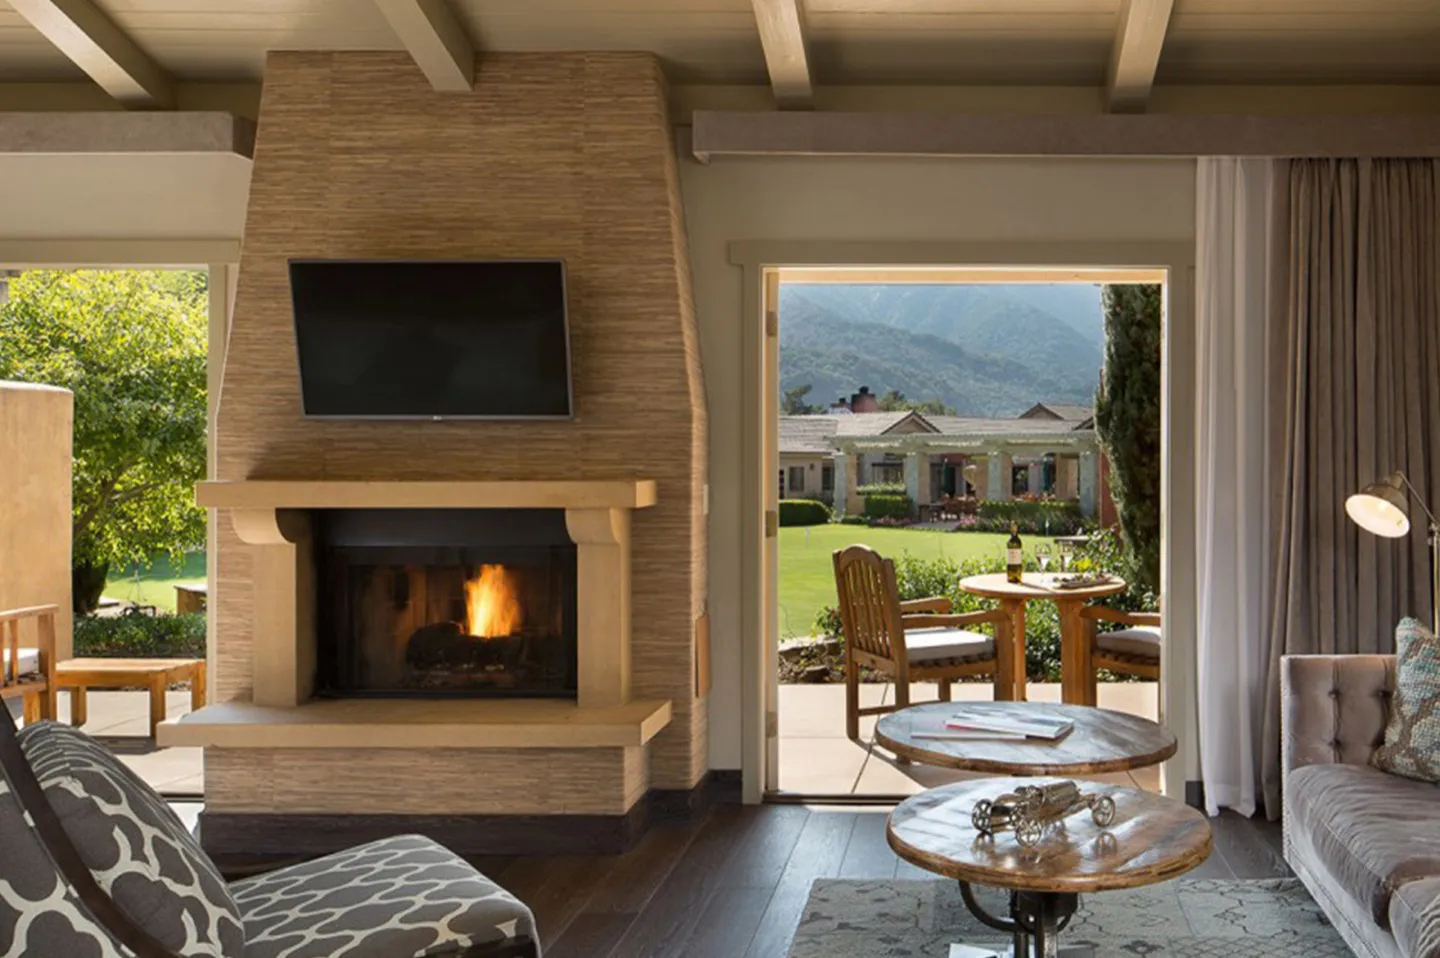 Stay in California's best hotels from LA to San Fran including Carmel Valley